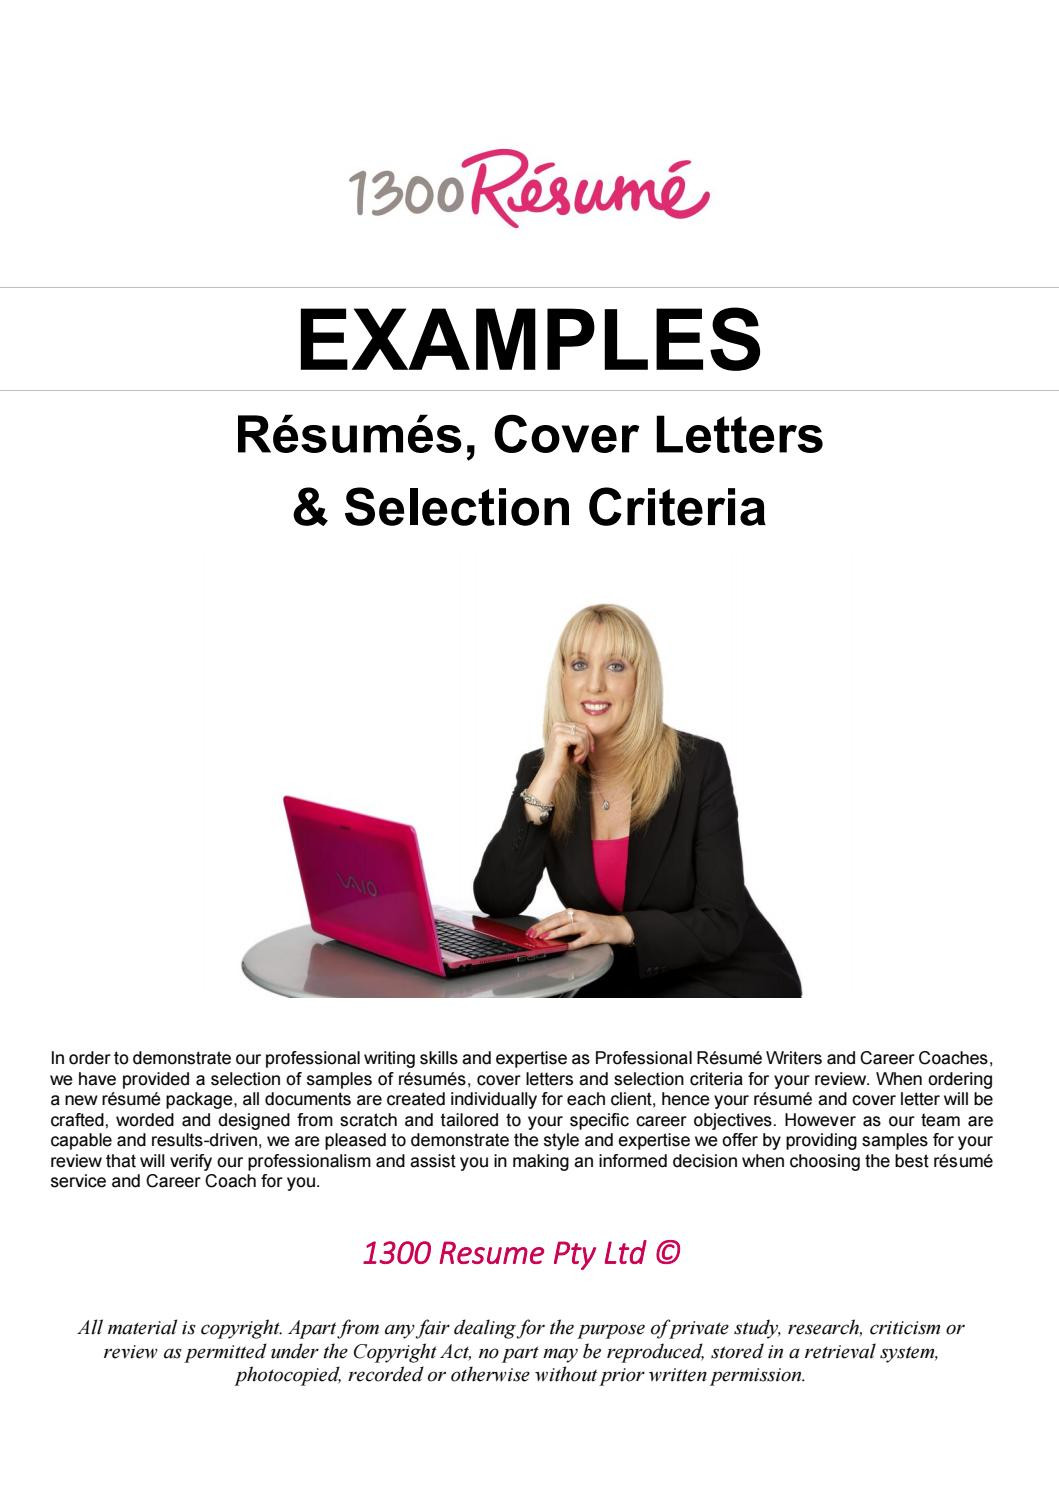 Part 121 First Officer Resume Sample 1300 Resume – Examples Of Work by 1300 Resume – issuu